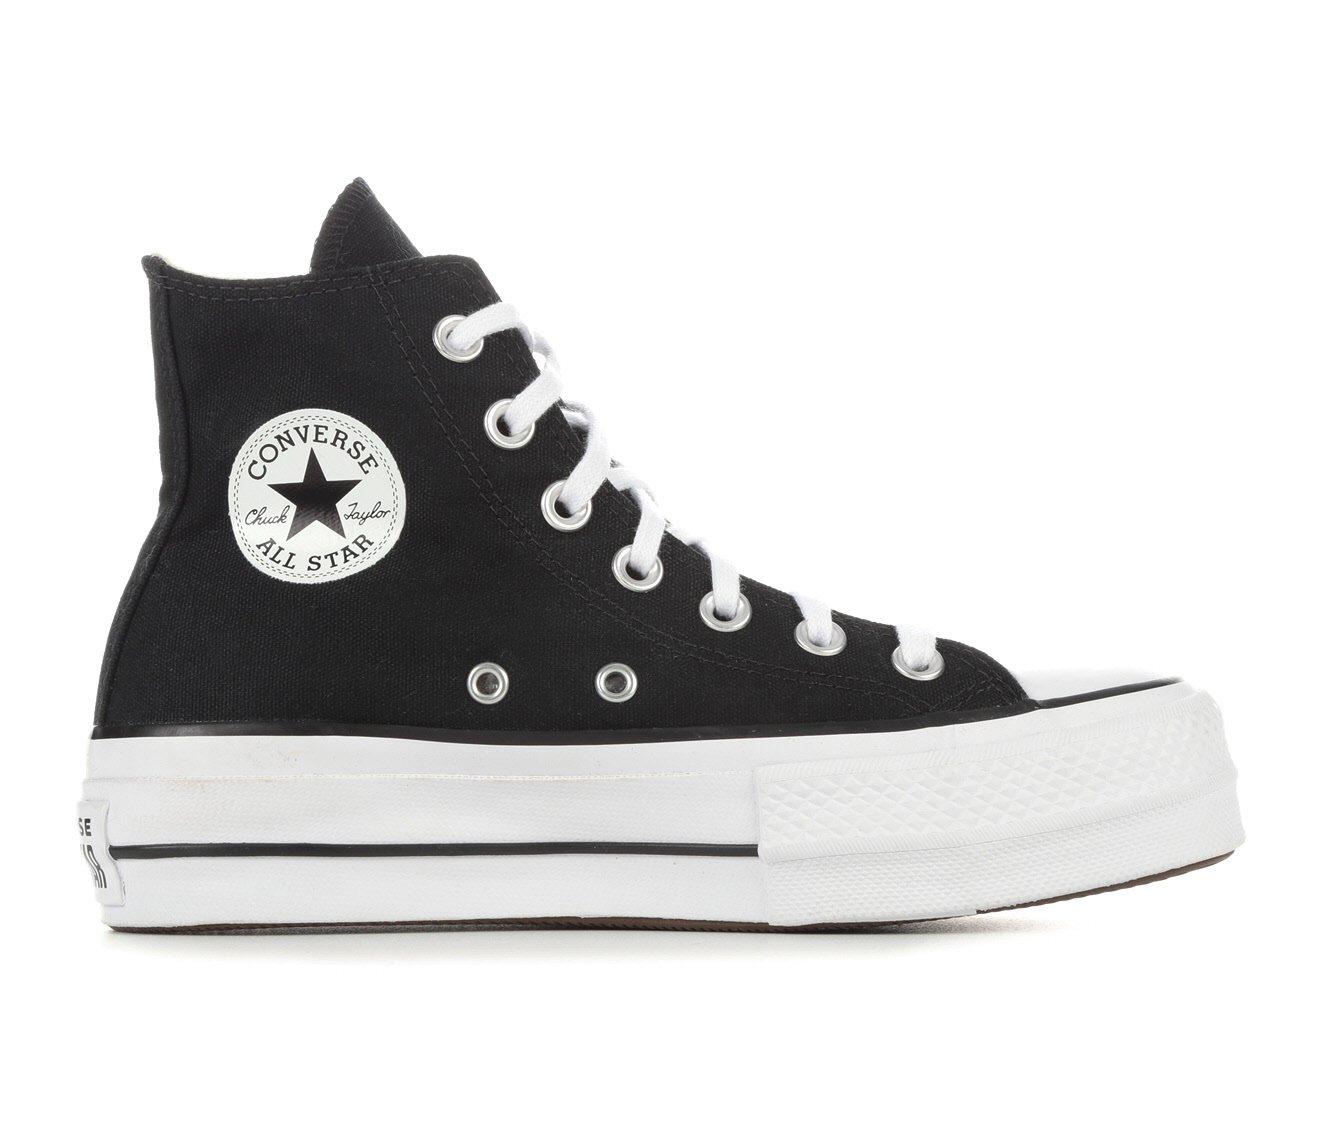 Converse Shoes & Sneakers | Carnival